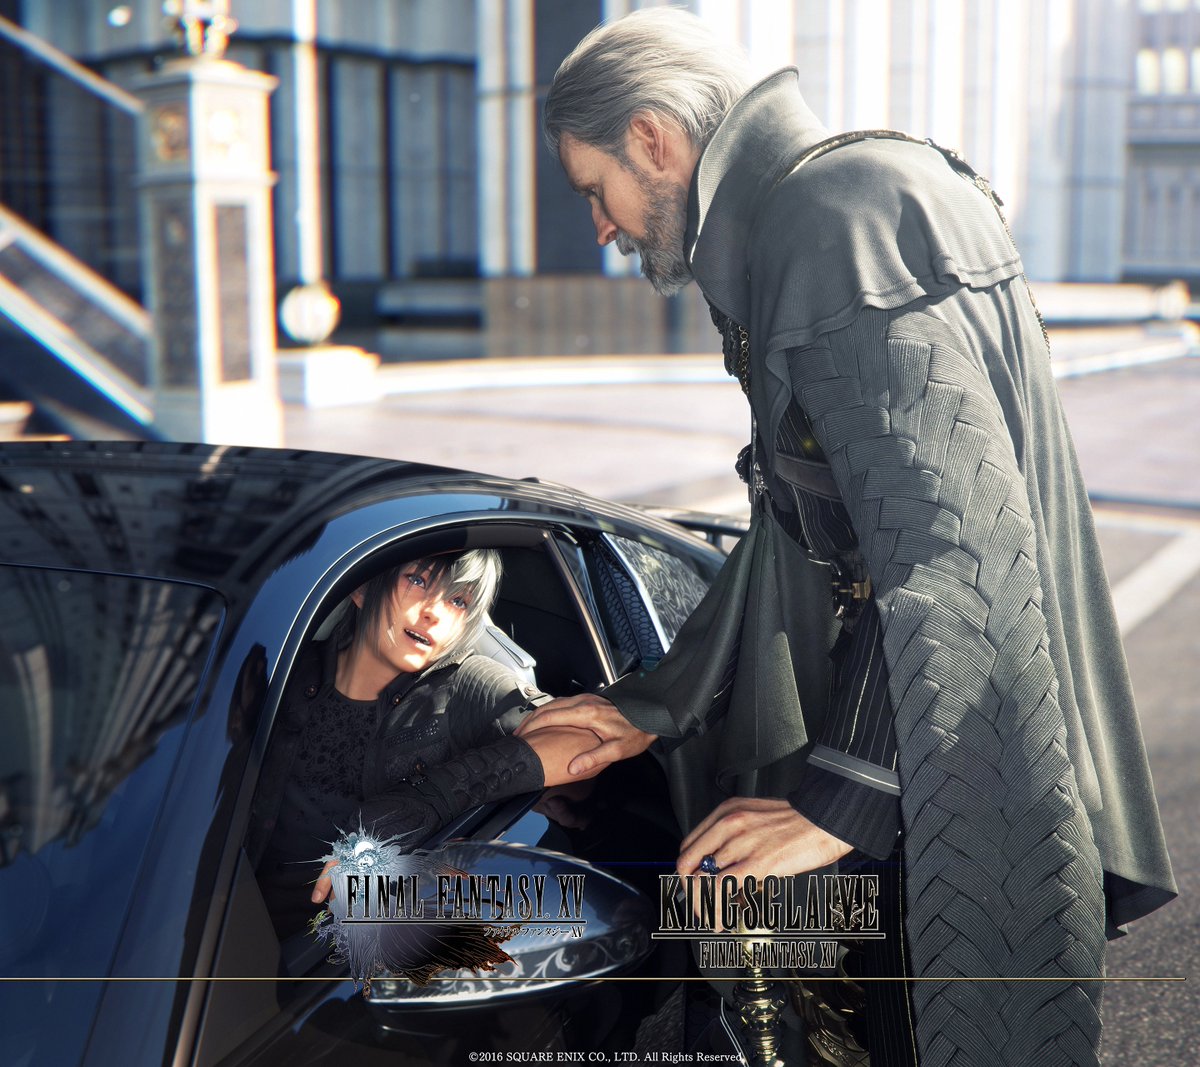 Kingsglaive Ffxv Auf Twitter Kingsglaive １周年 前日 特製スマホ タブレット用壁紙その Iphone T Co Kkz0pgmz7s Ipad T Co Bxrcwx7j24 Android T Co Ypkvzsfwnz T Co Kylalhq9au Twitter